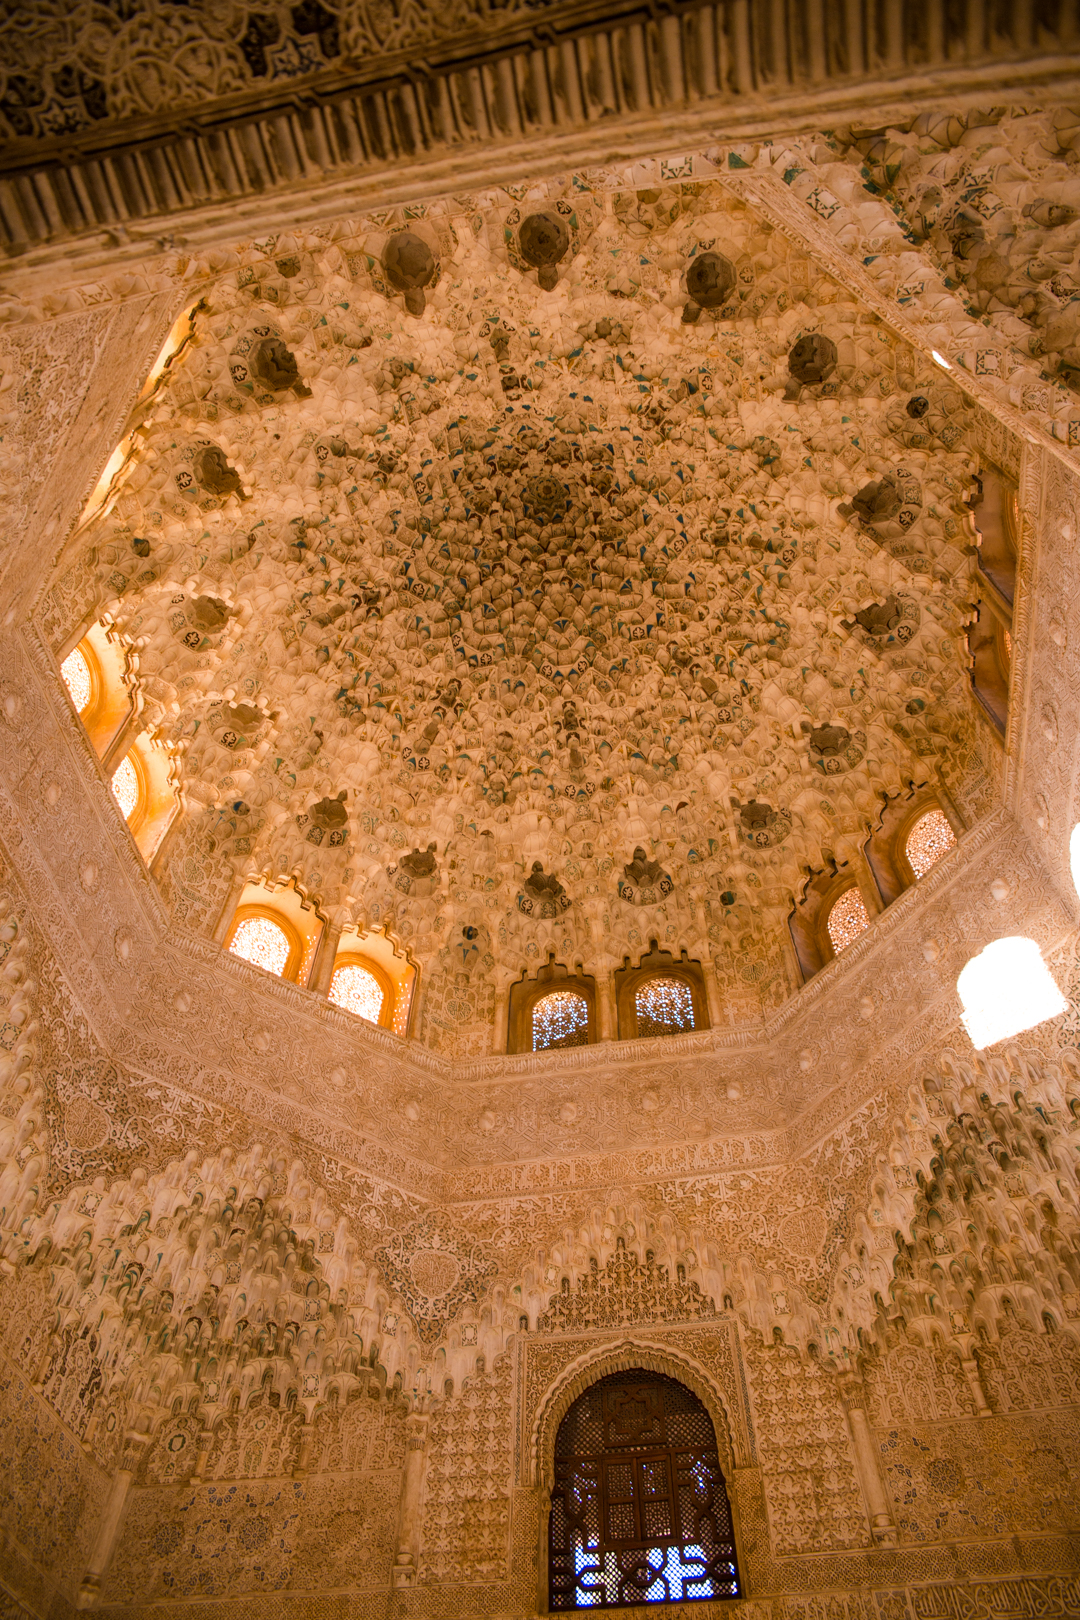 The intricate decorations and engravings in the ceiling at the Hall of Ambassadors inside the Alhambra, Granada, Spain.